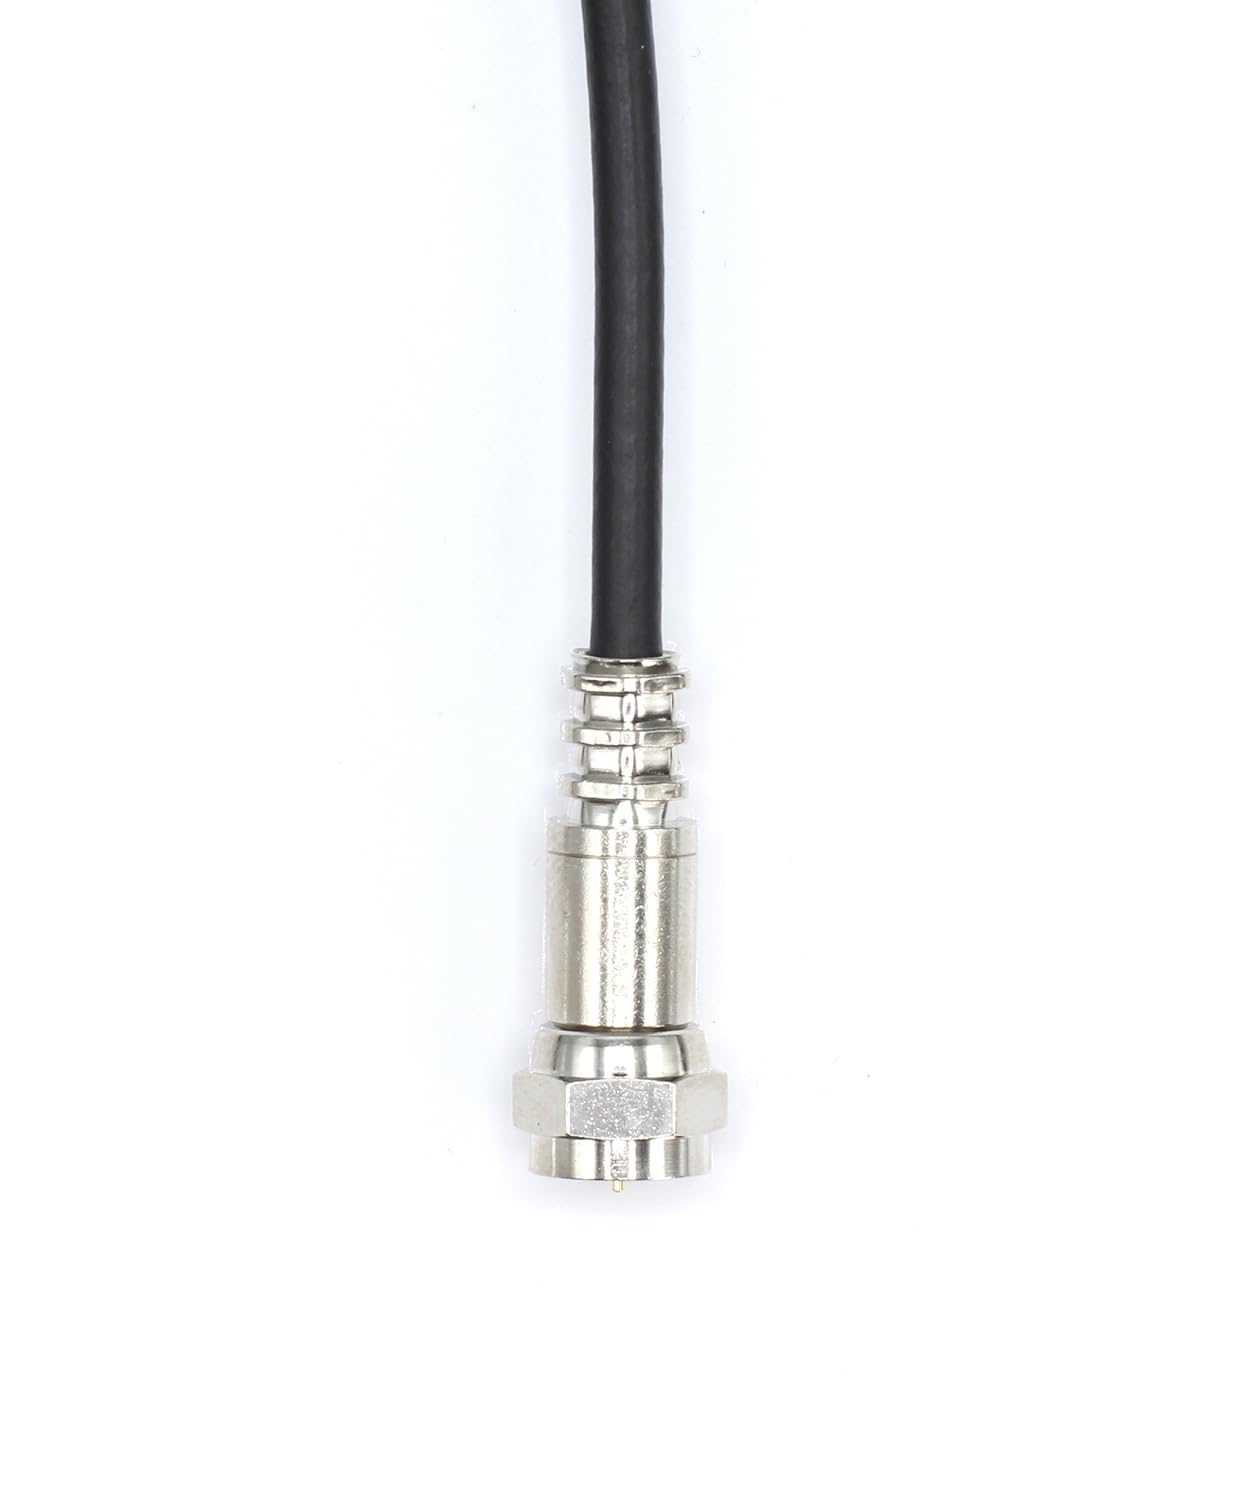 The Cimple Co Thin Coax Cable | Black RG58 Coaxial Cable for DirecTV, Satellite, CATV – 6 Feet